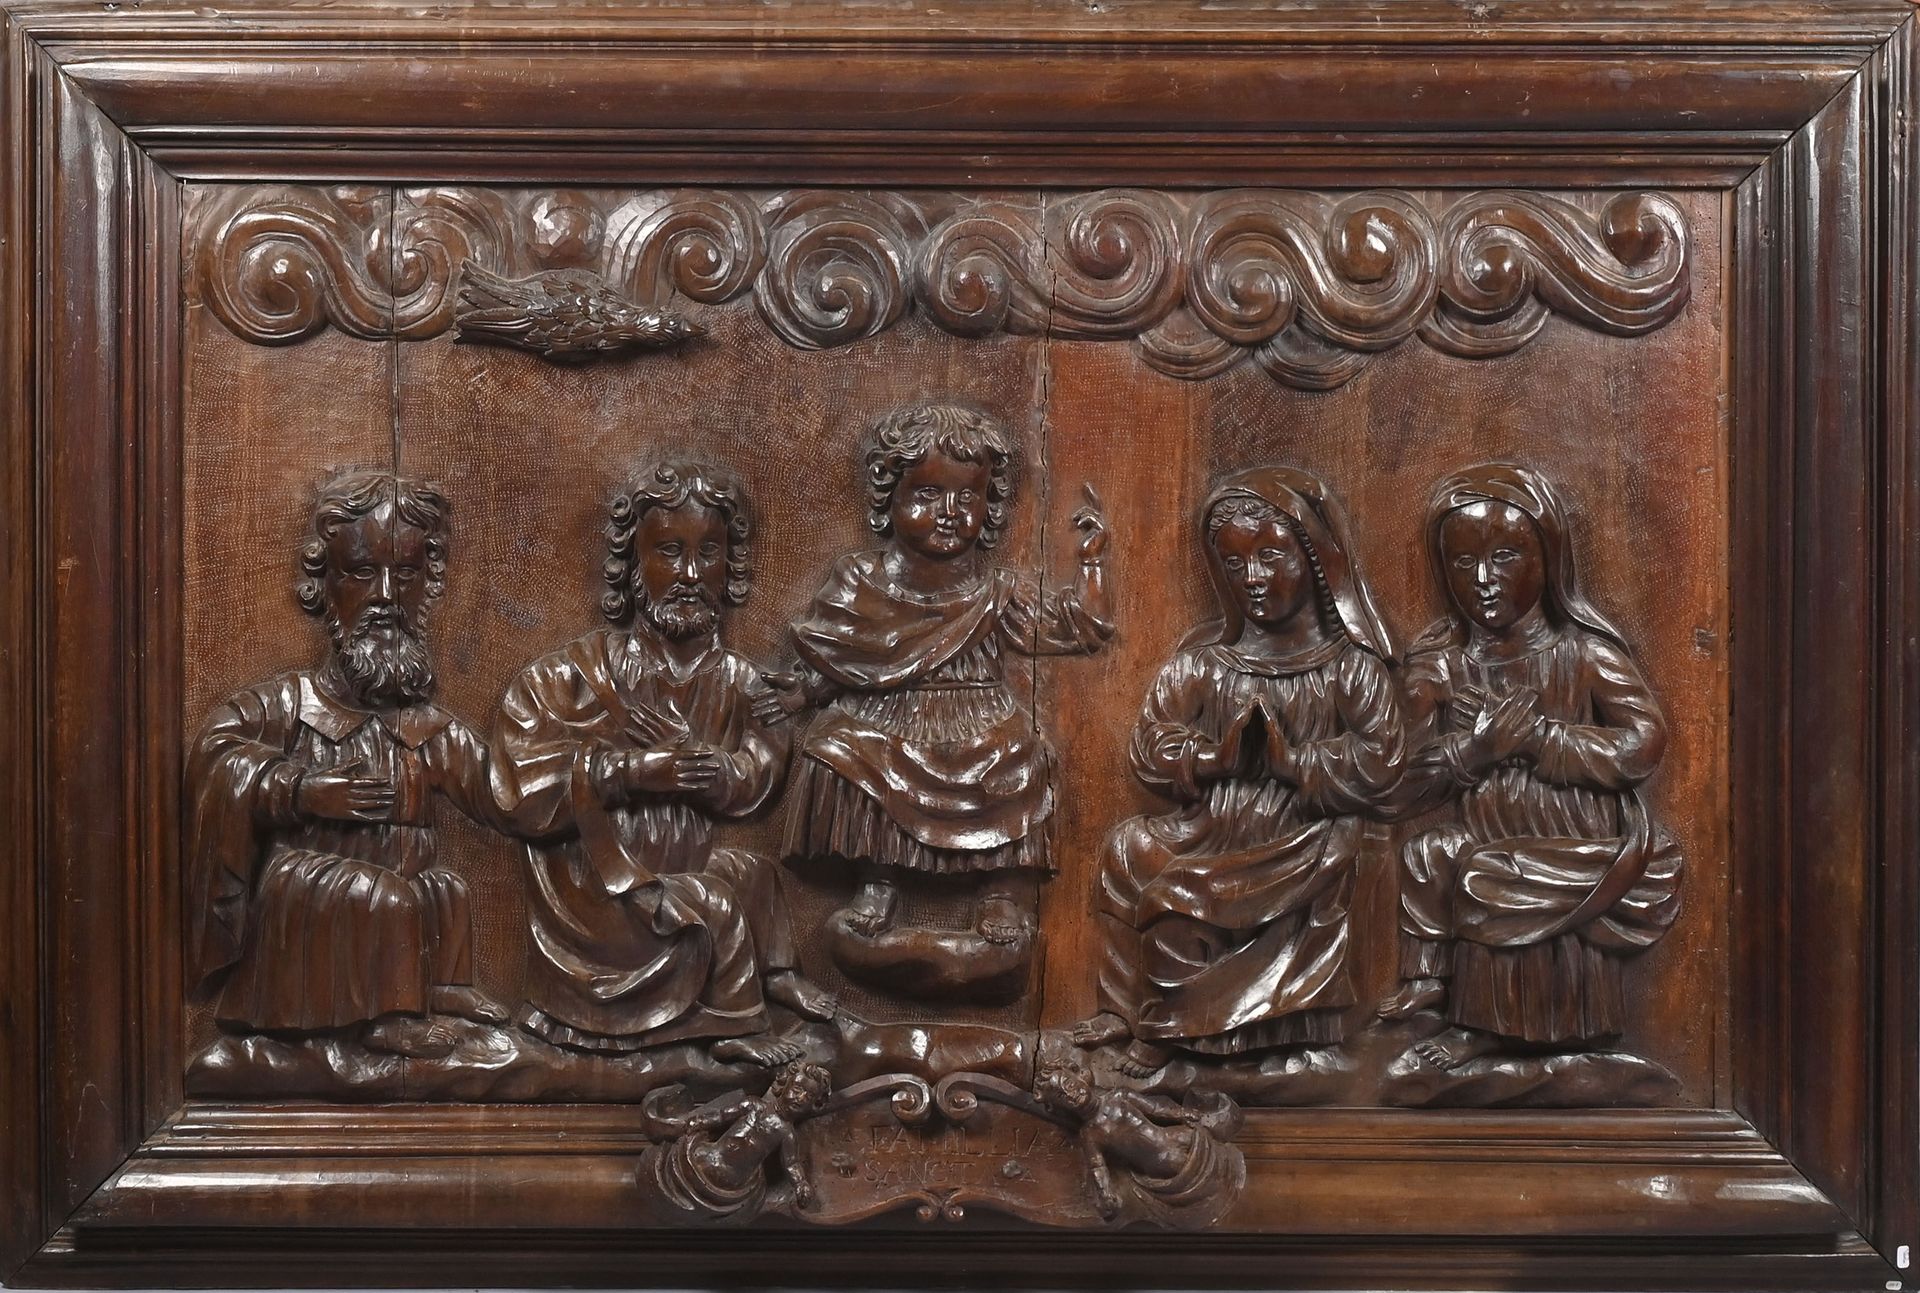 Null FRANCE - Around 1600
Holy family
Bas-relief in oak
Titled in a cartouche fl&hellip;